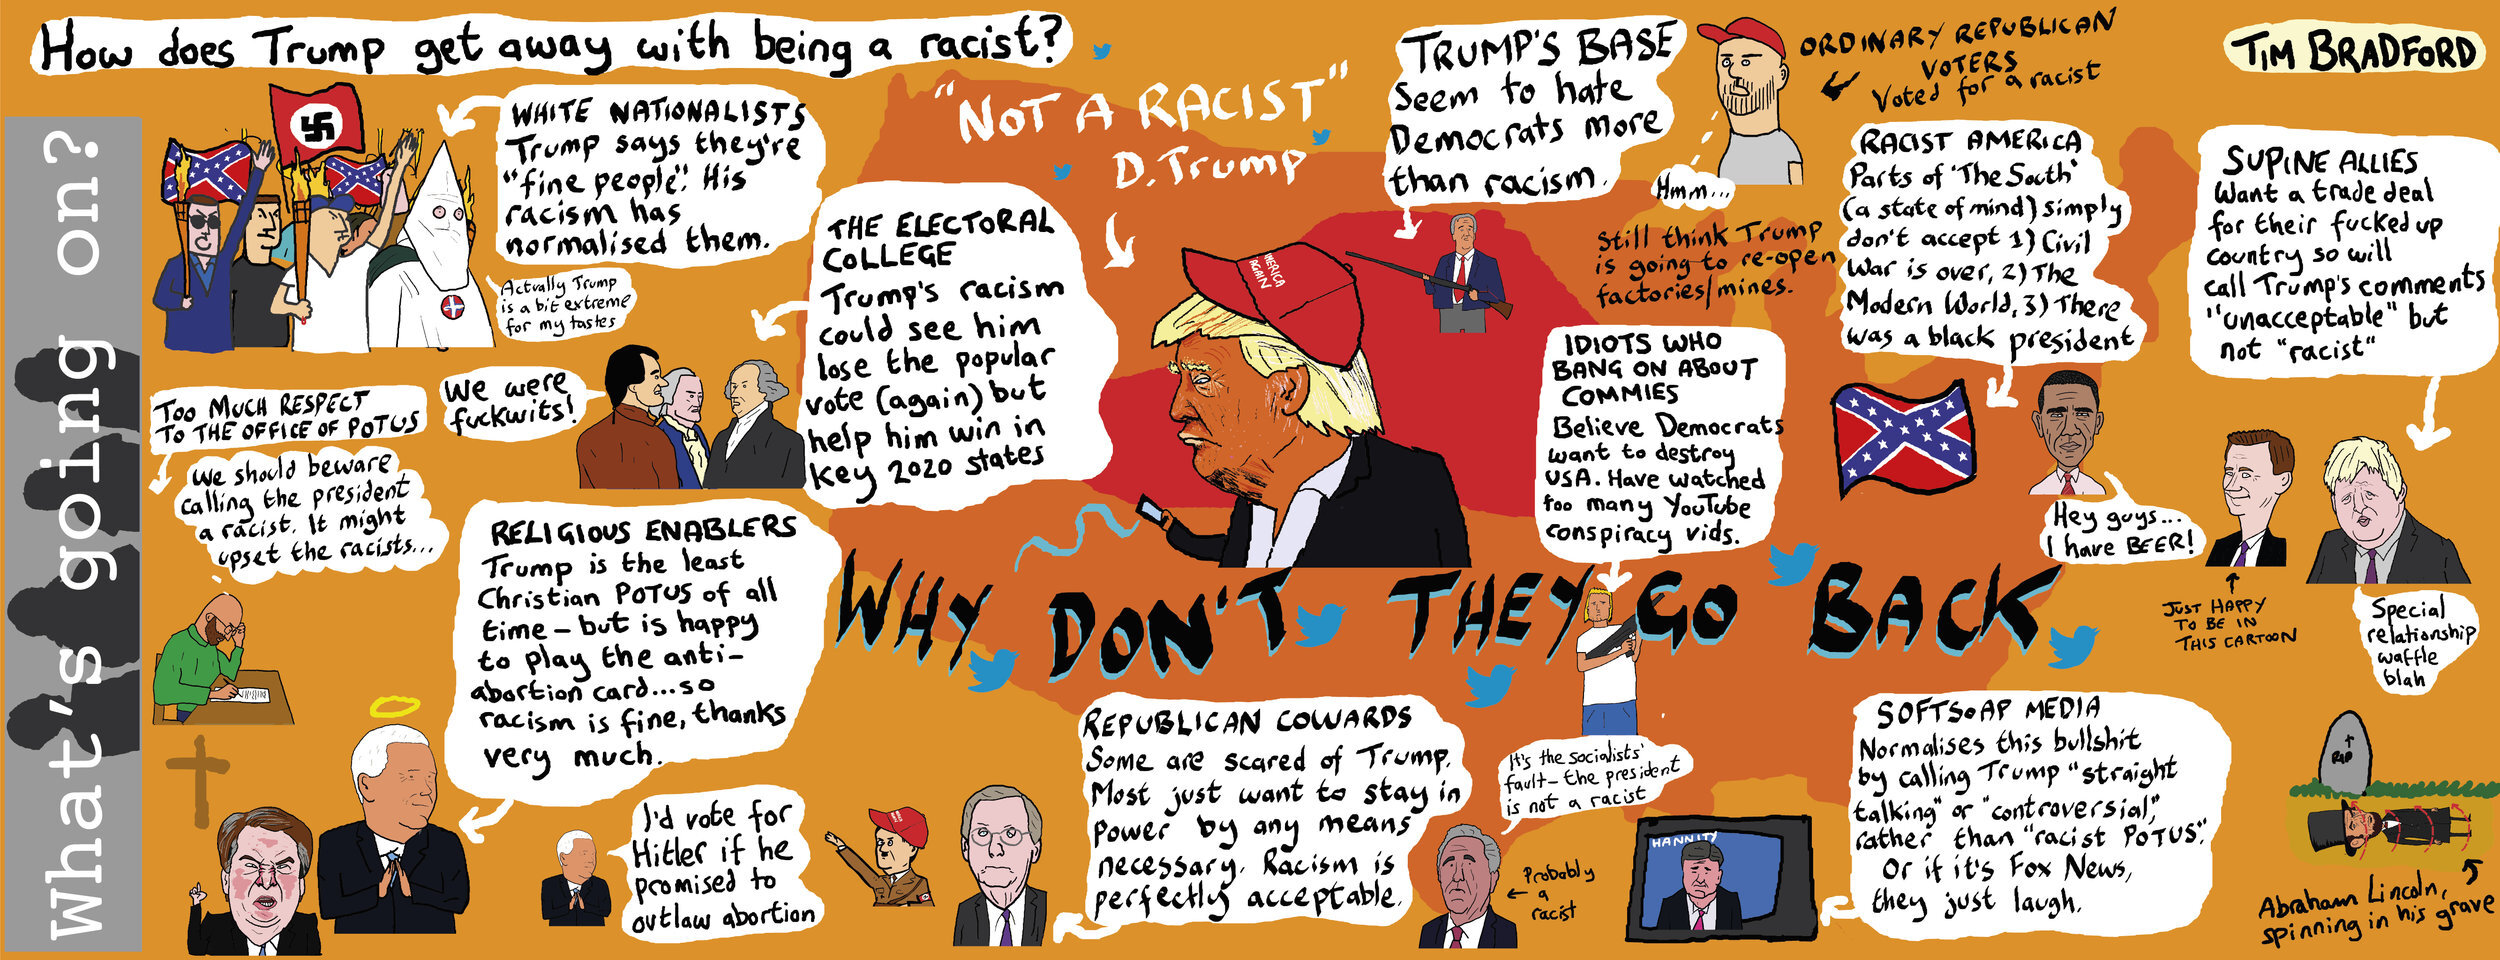 How does Trump get away with being a racist? - 16/07/19